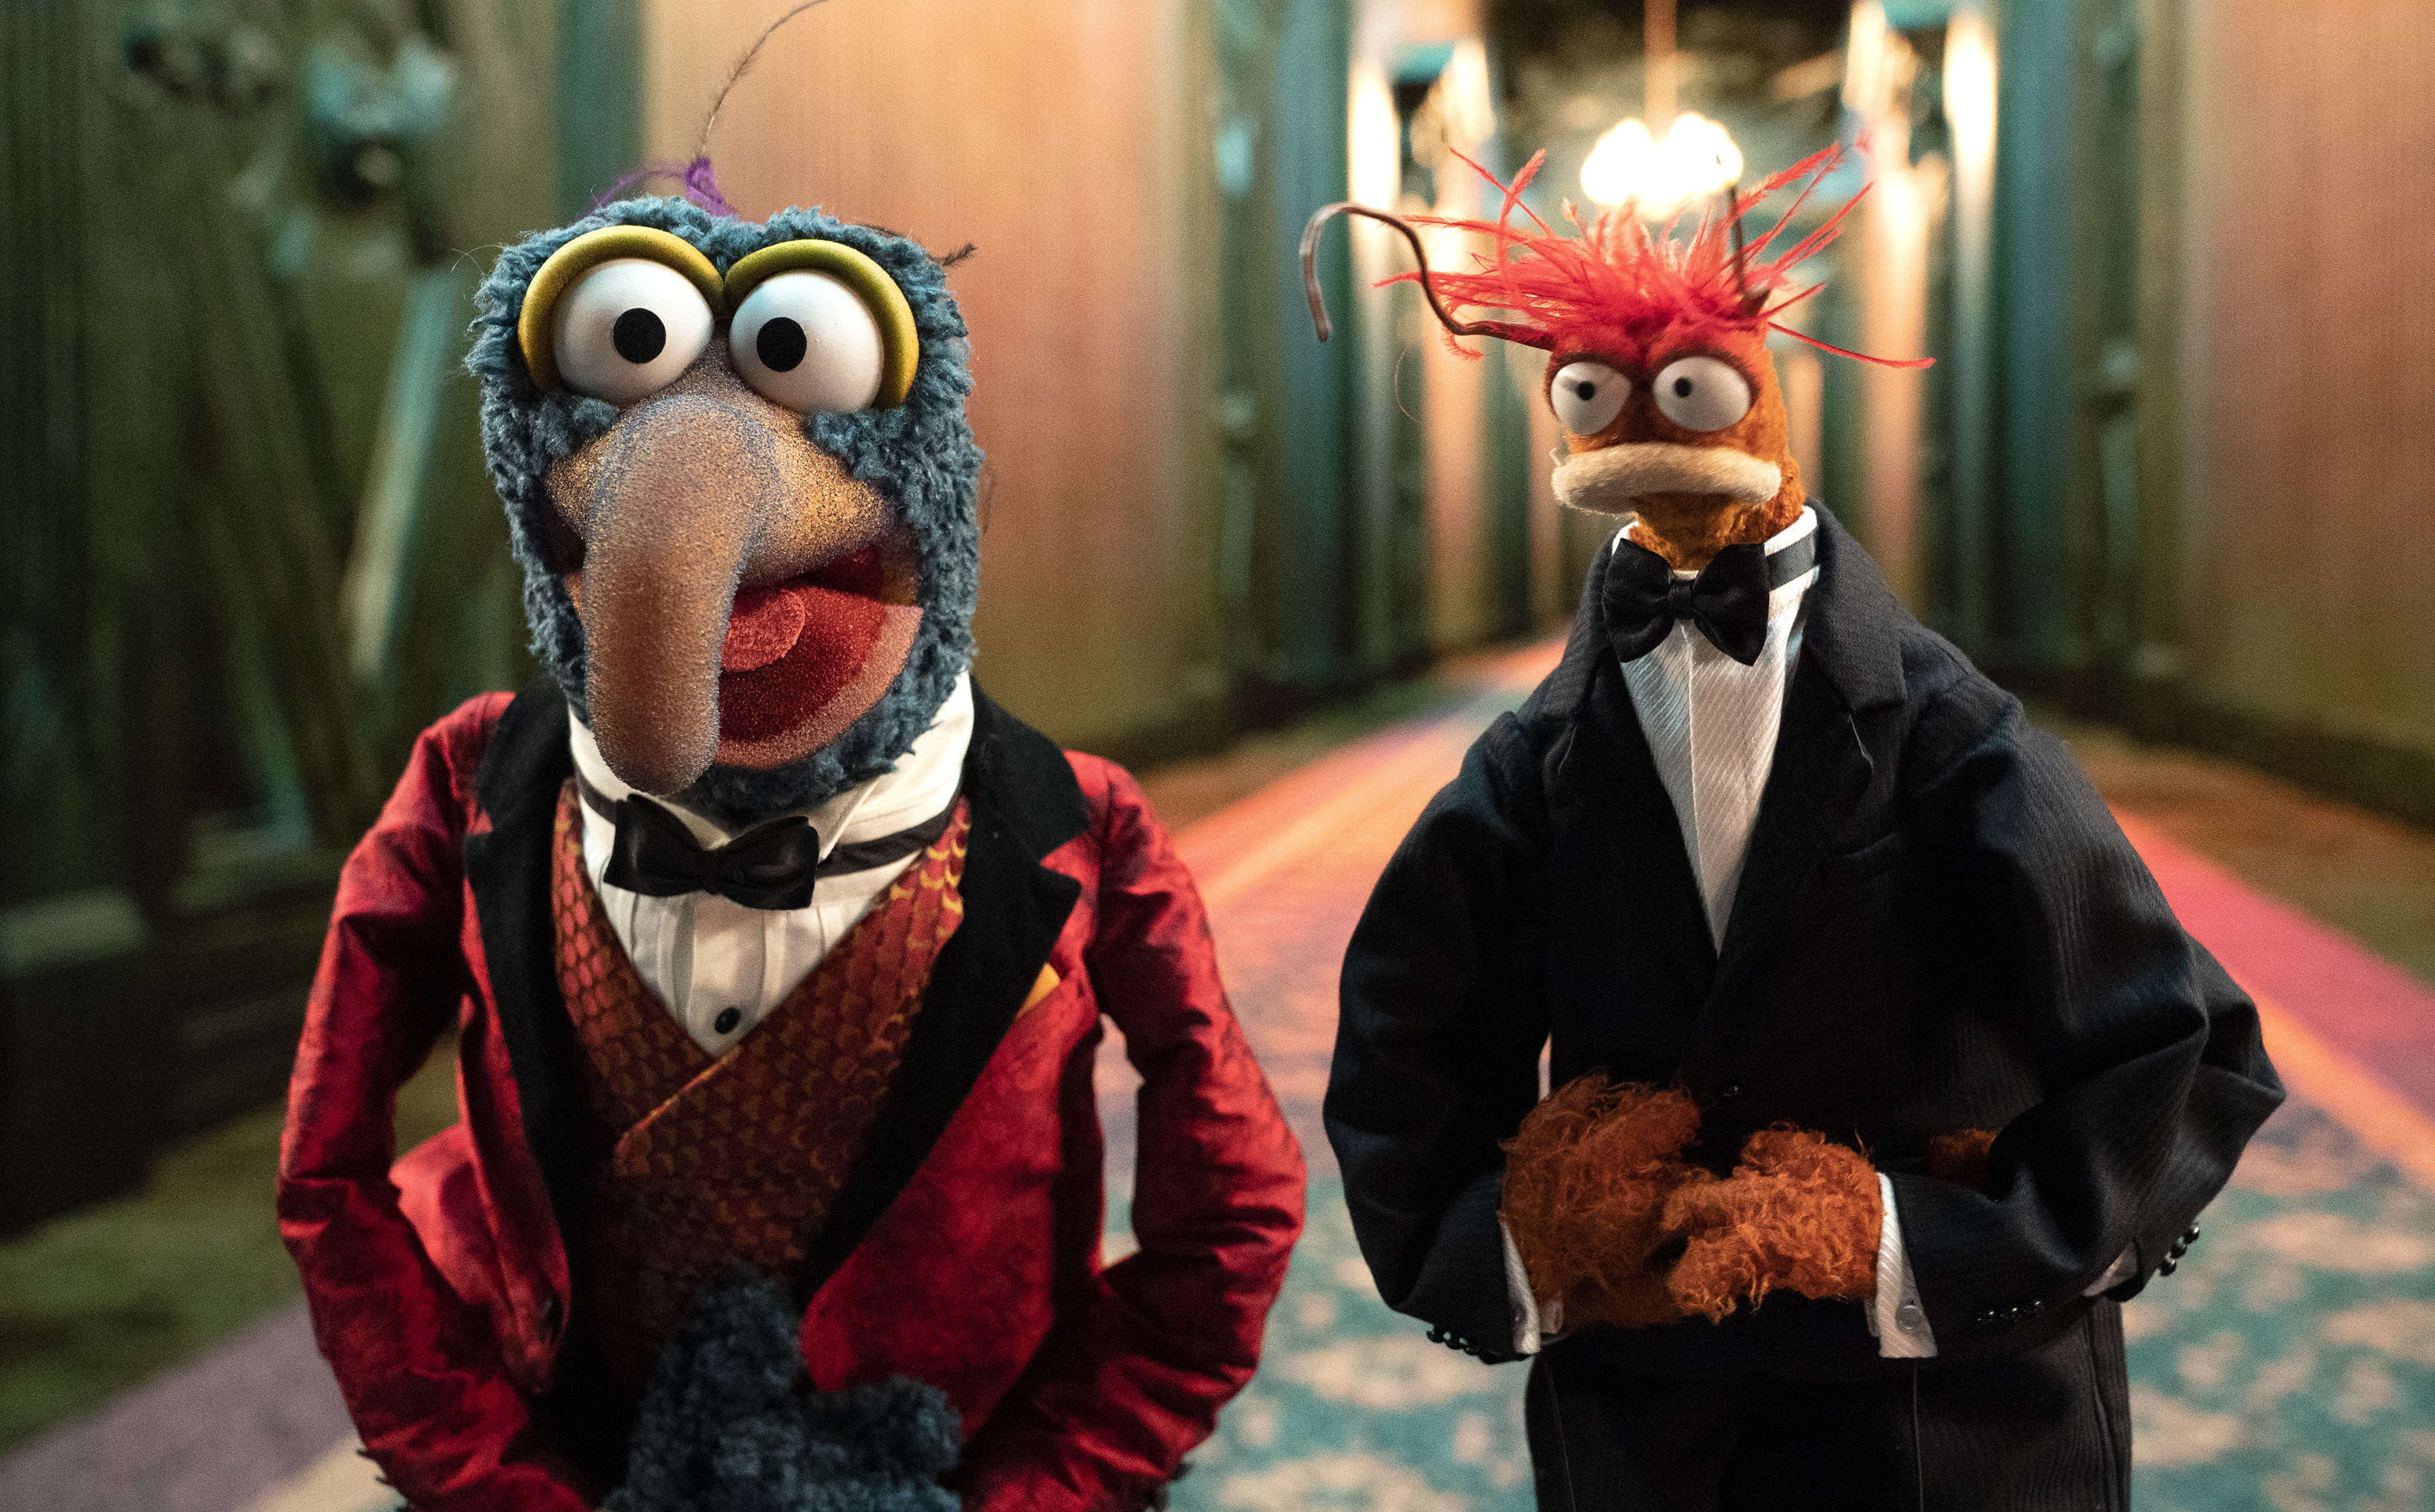 Muppet Stuff: Pepe To Appear on The Game Awards!